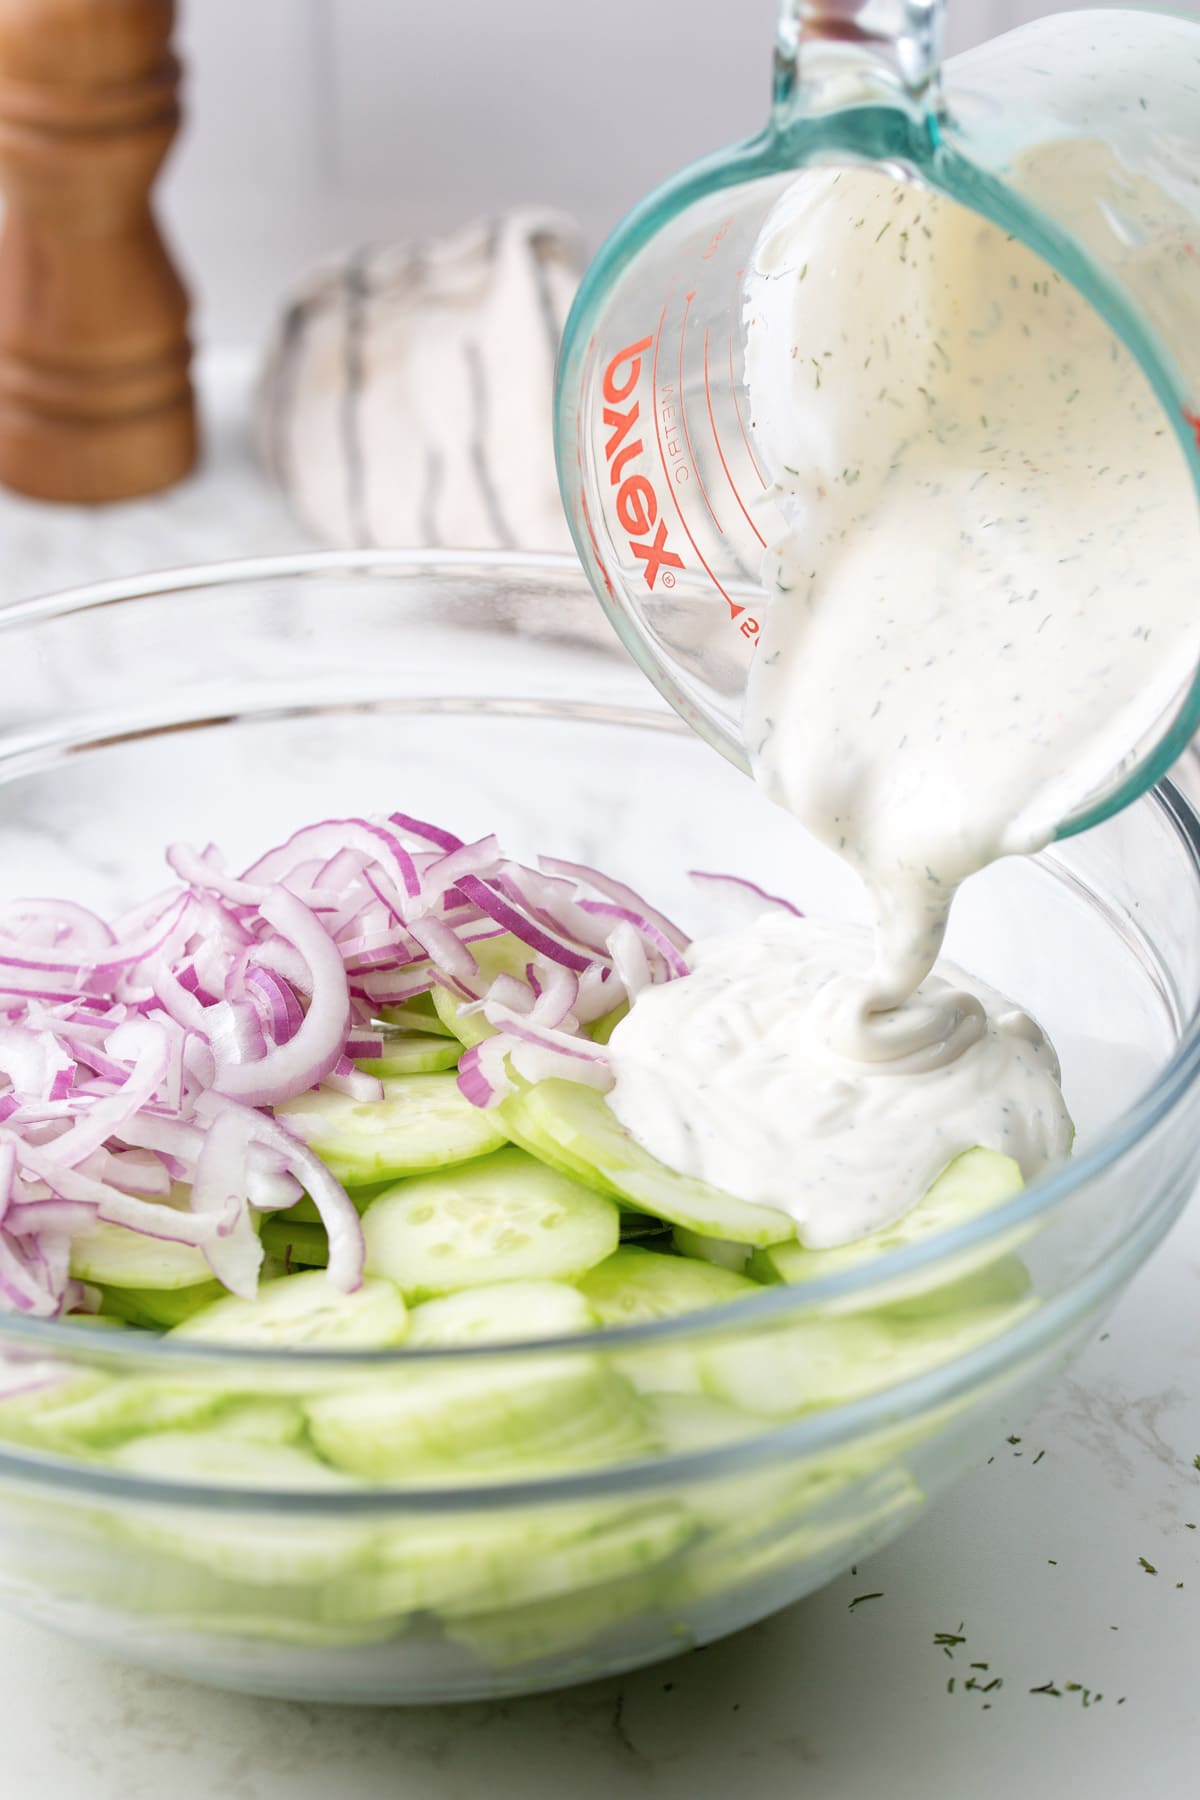 Creamy cucumber salad dressing poured into a mixing bowl with sliced cucumbers and red onions.